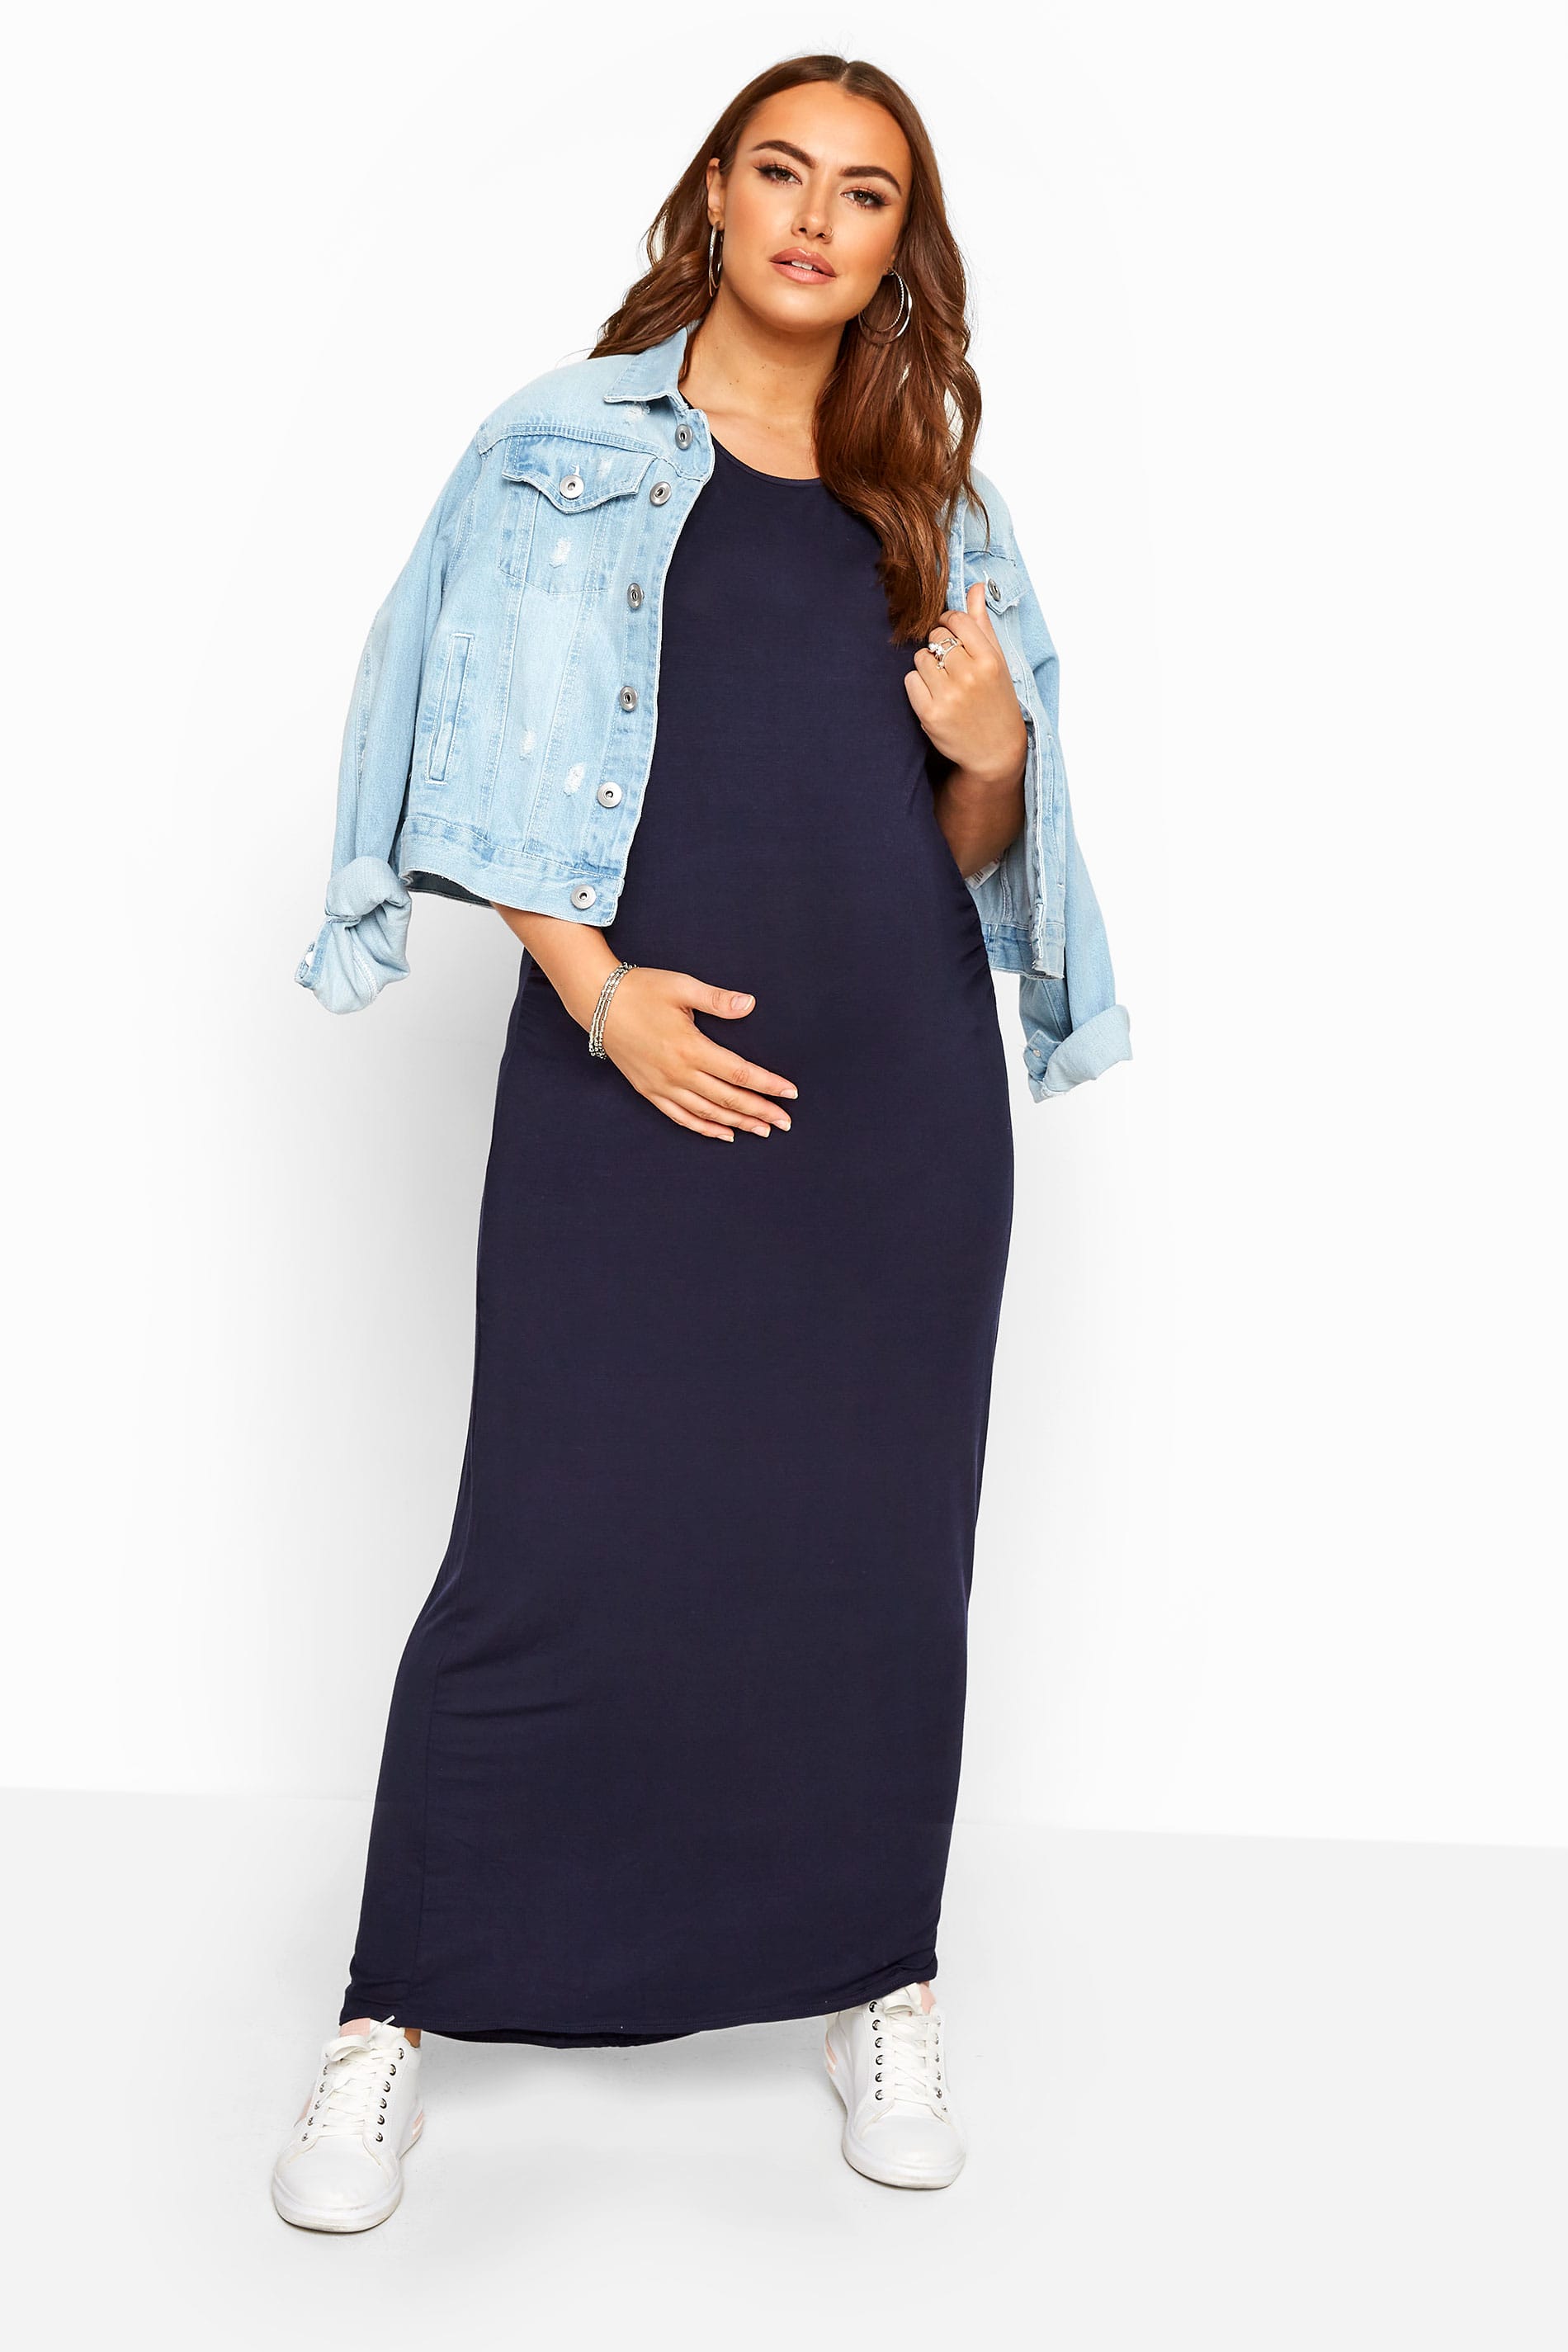 BUMP IT UP MATERNITY Navy Maxi Dress With Ruched Sides 